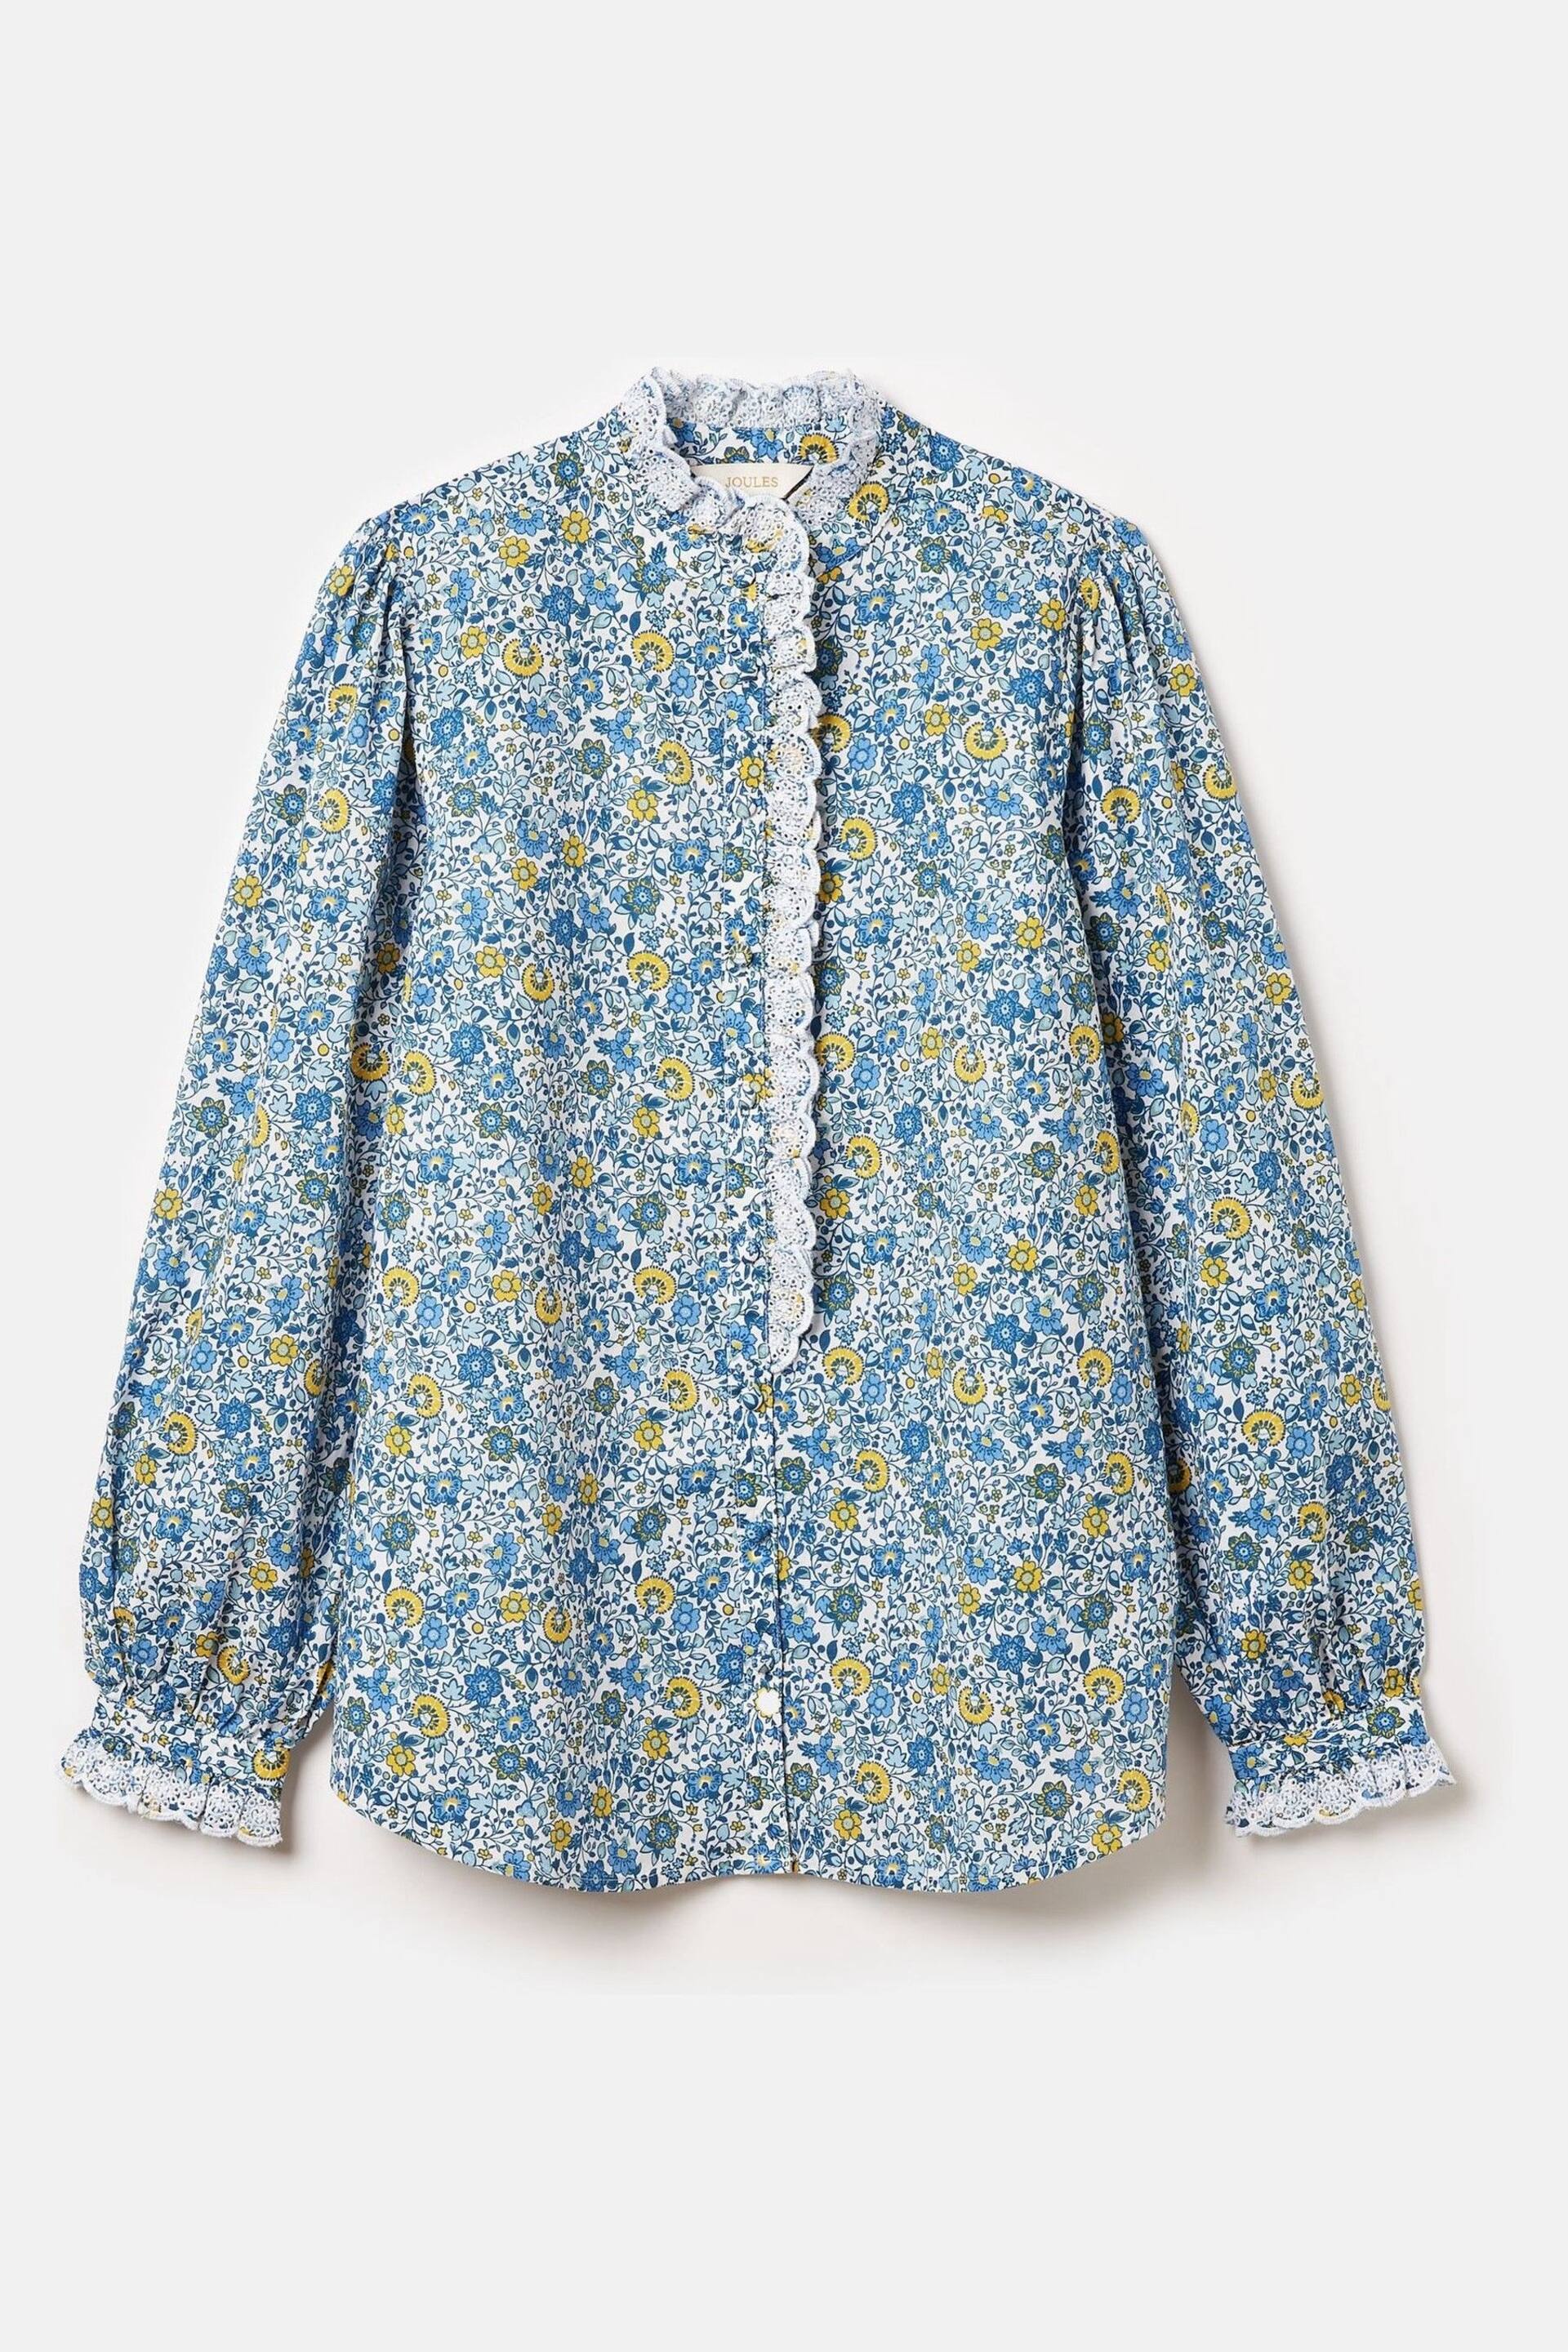 Joules Valentina Blue/White Broderie Trim Blouse - Image 6 of 6